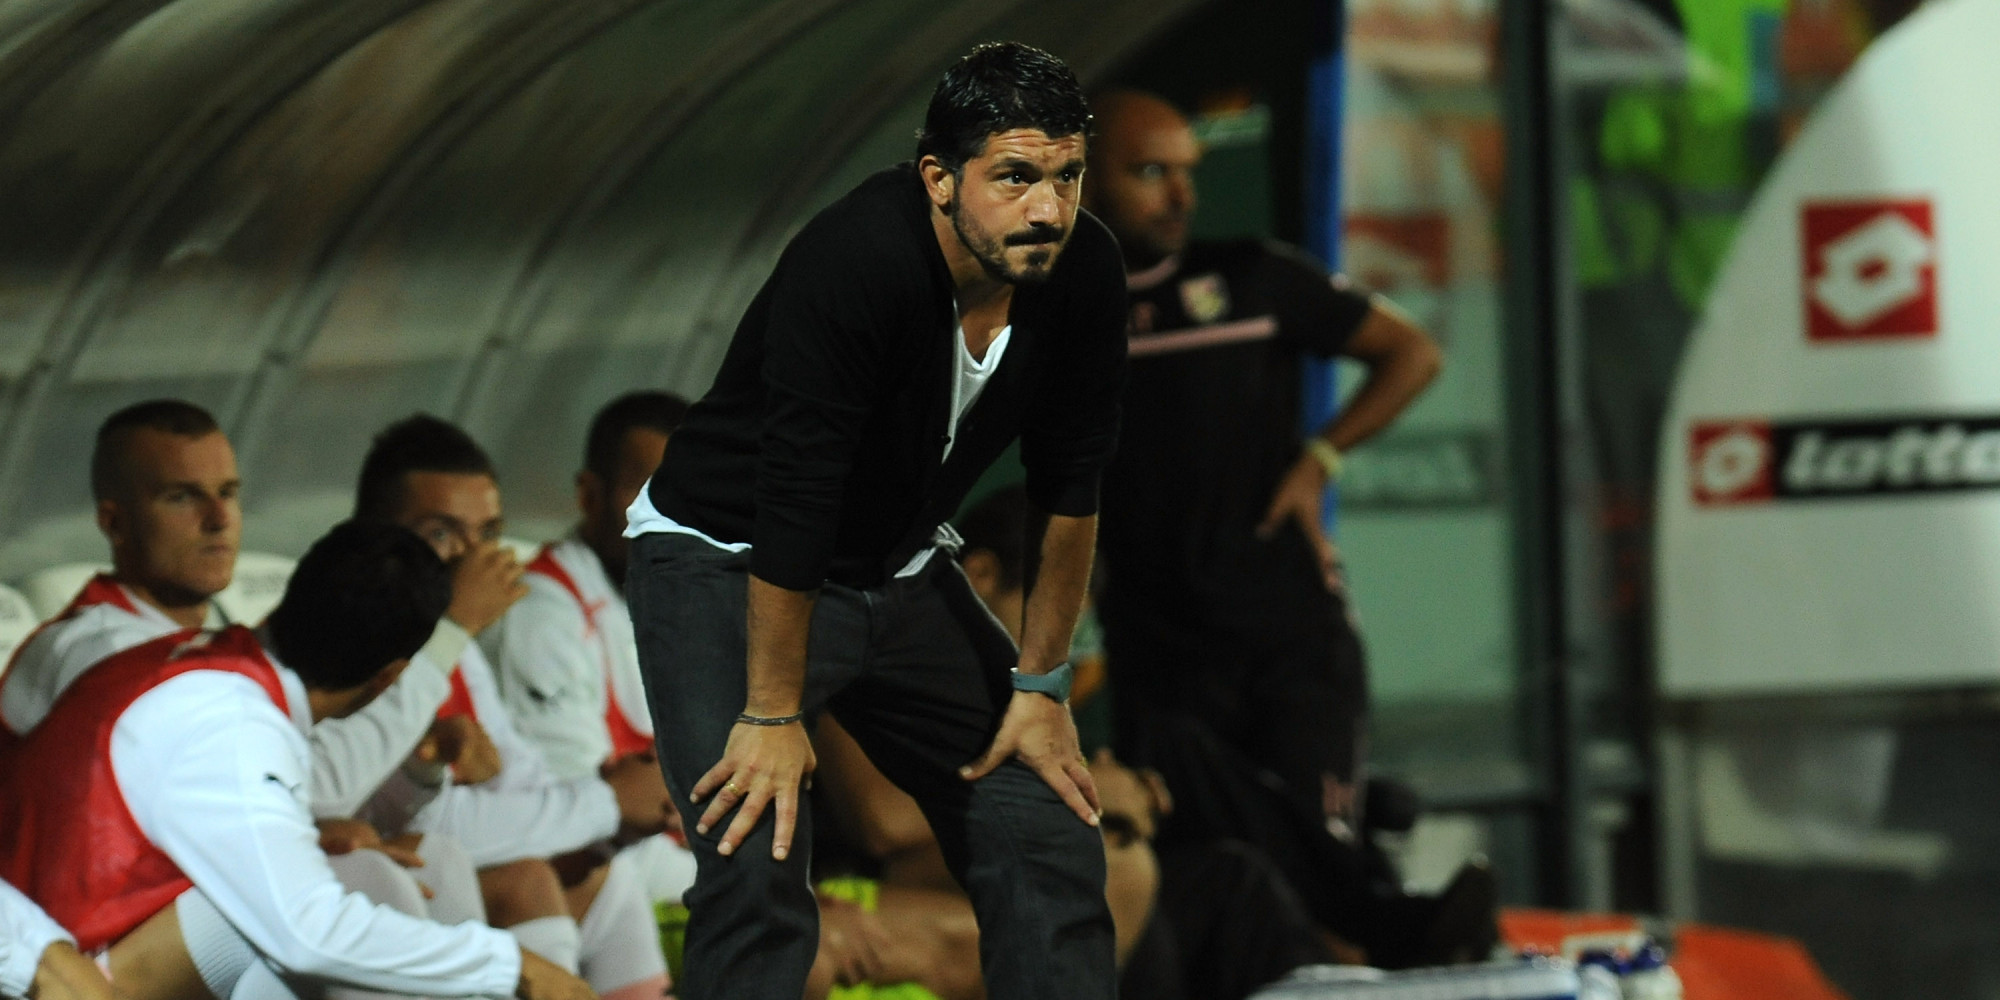 Gattusso has started in the world of benches.